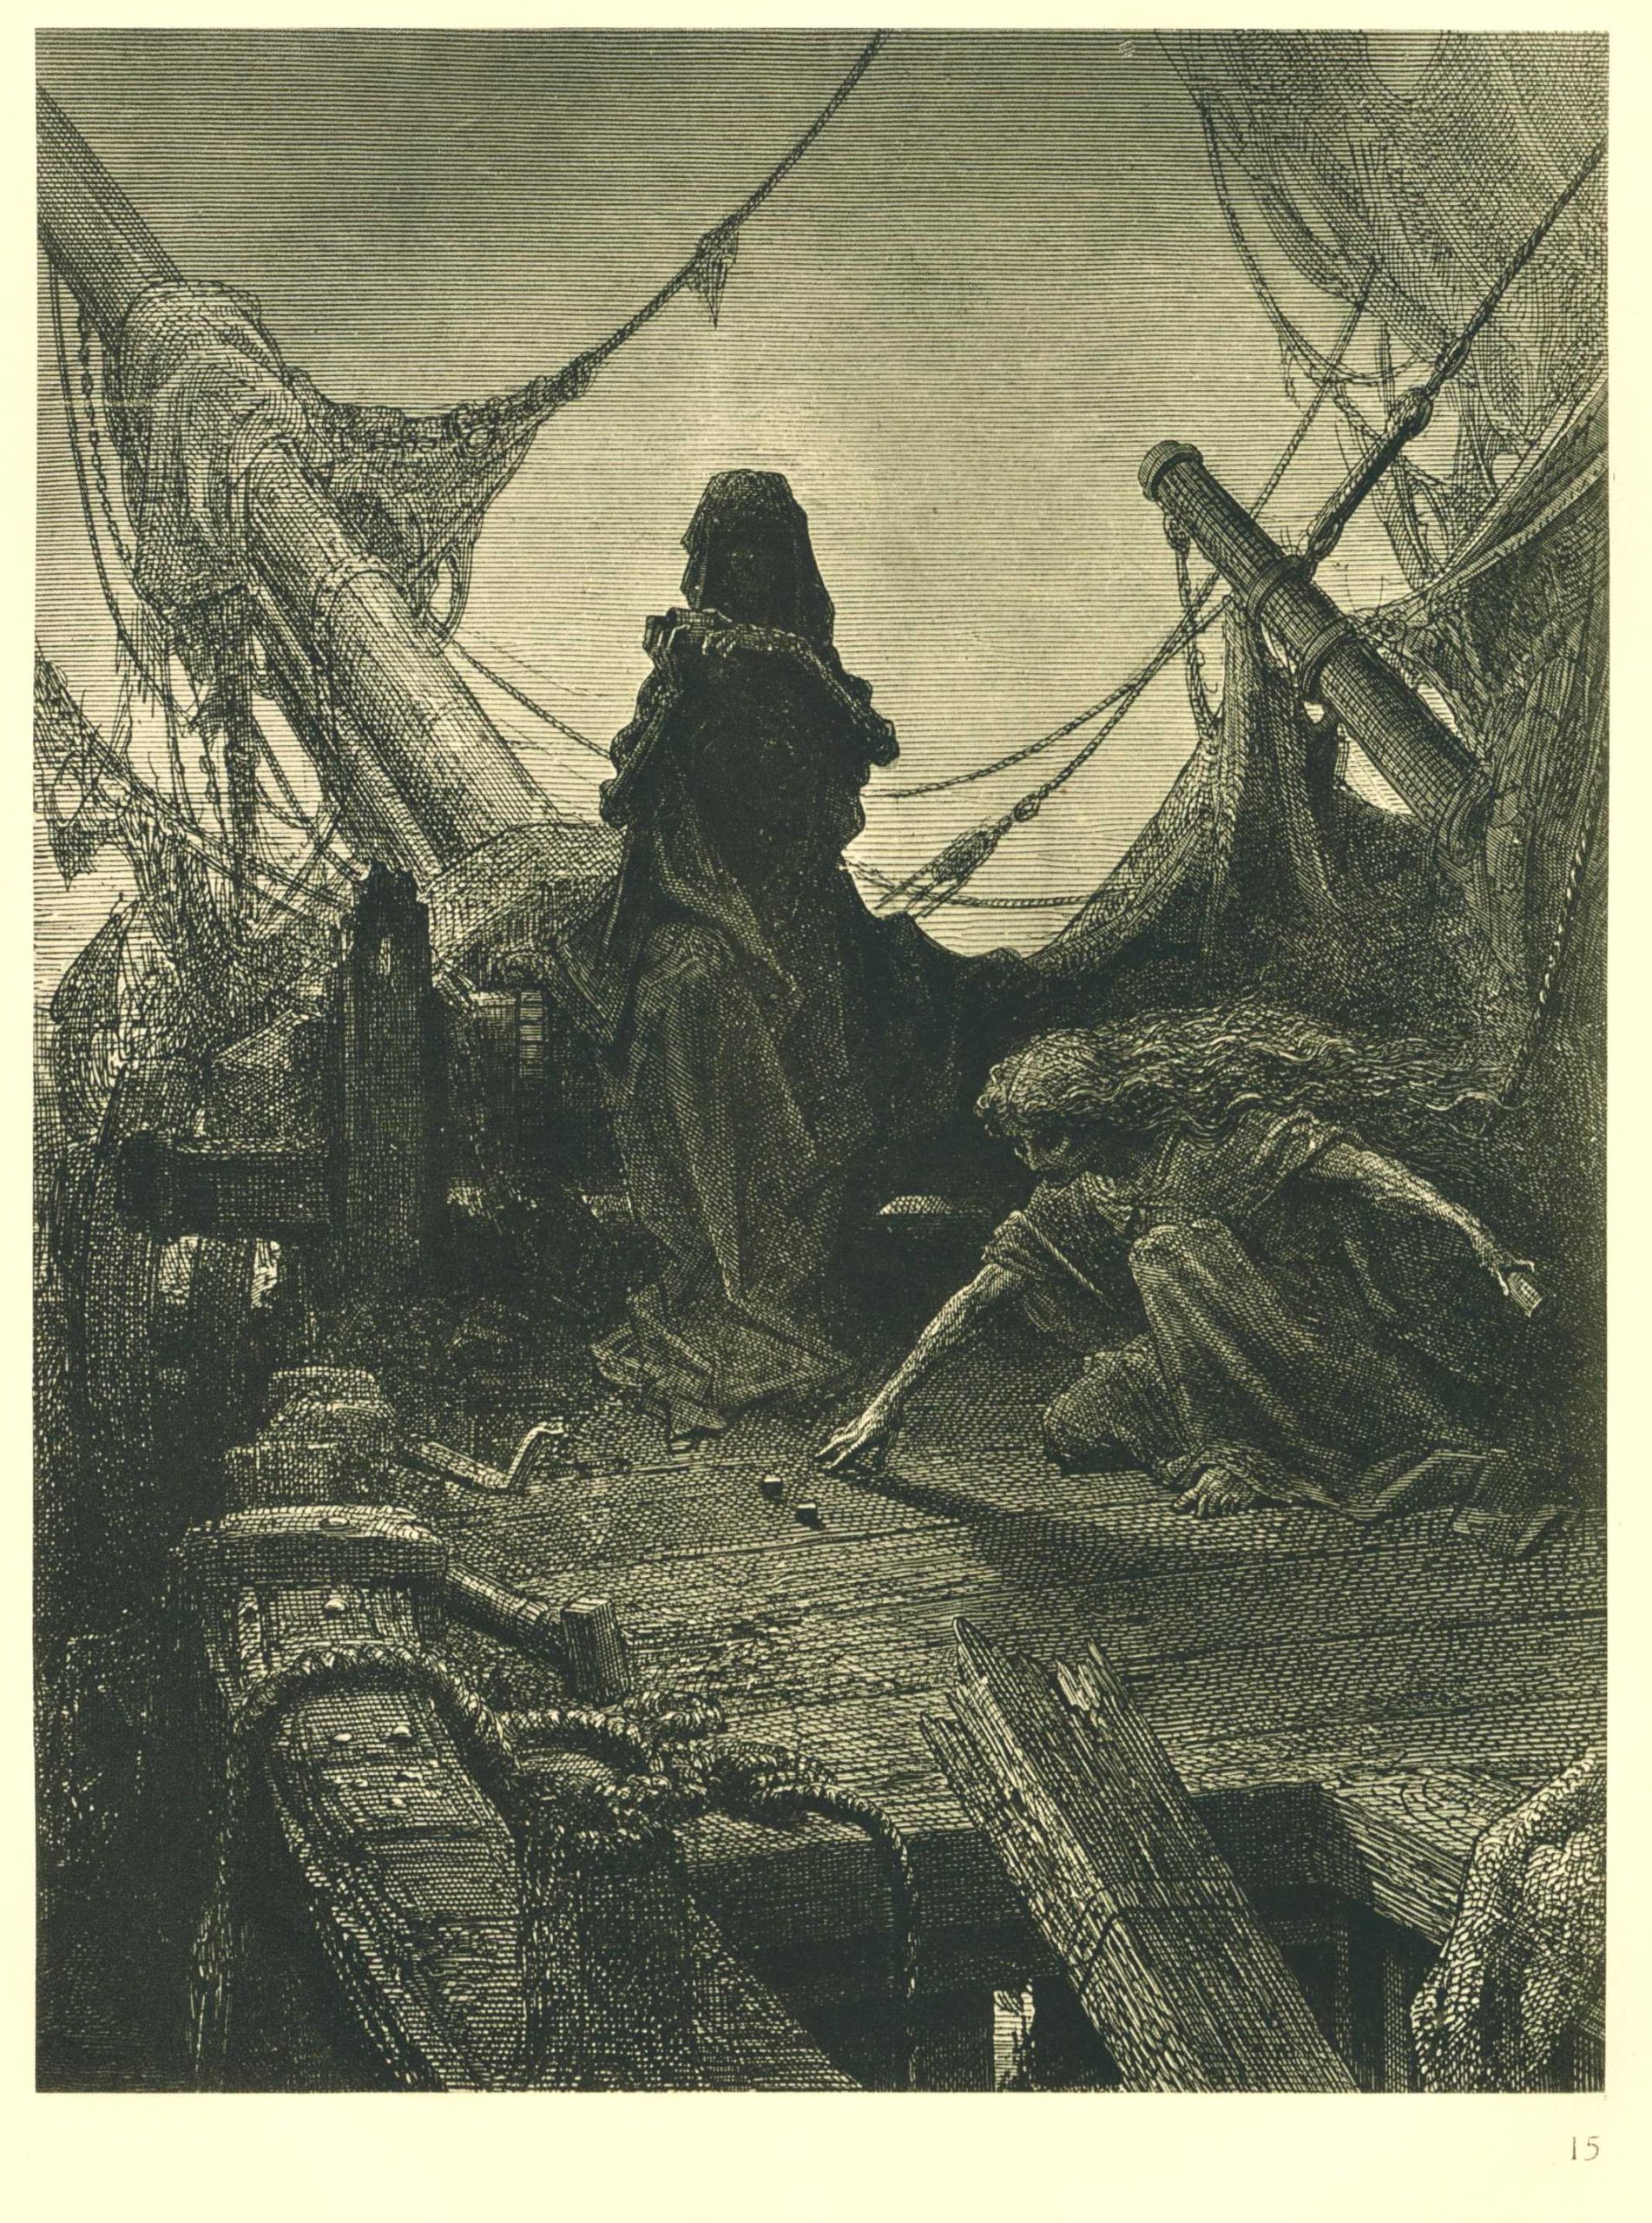 A cloaked figure standing in the shadows of a wrecked ship while a woman crouches at their side